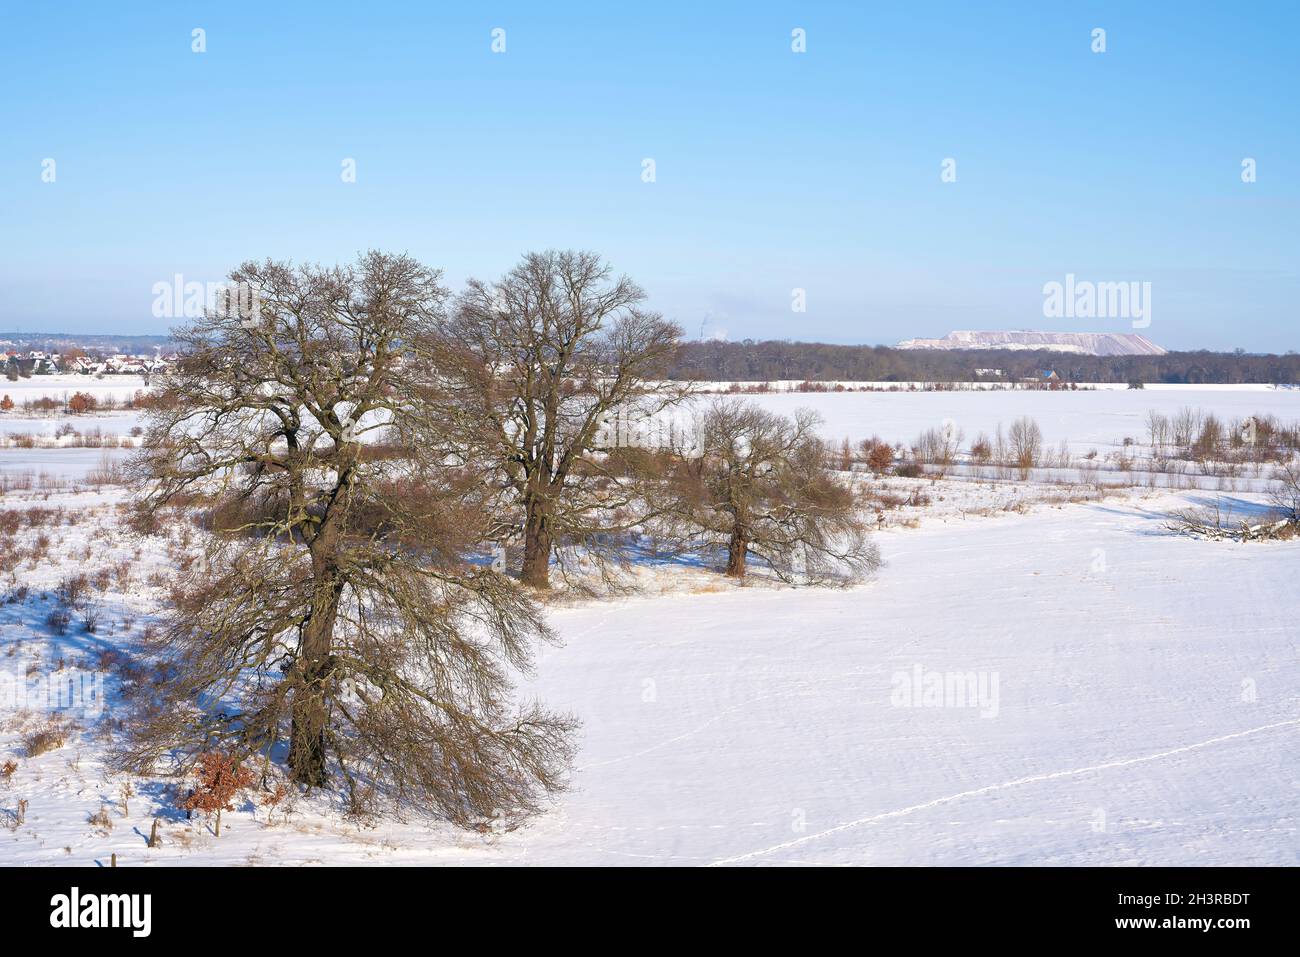 Landscape with trees on the bank of the river Elbe near the village Glindenberg in Winter Stock Photo